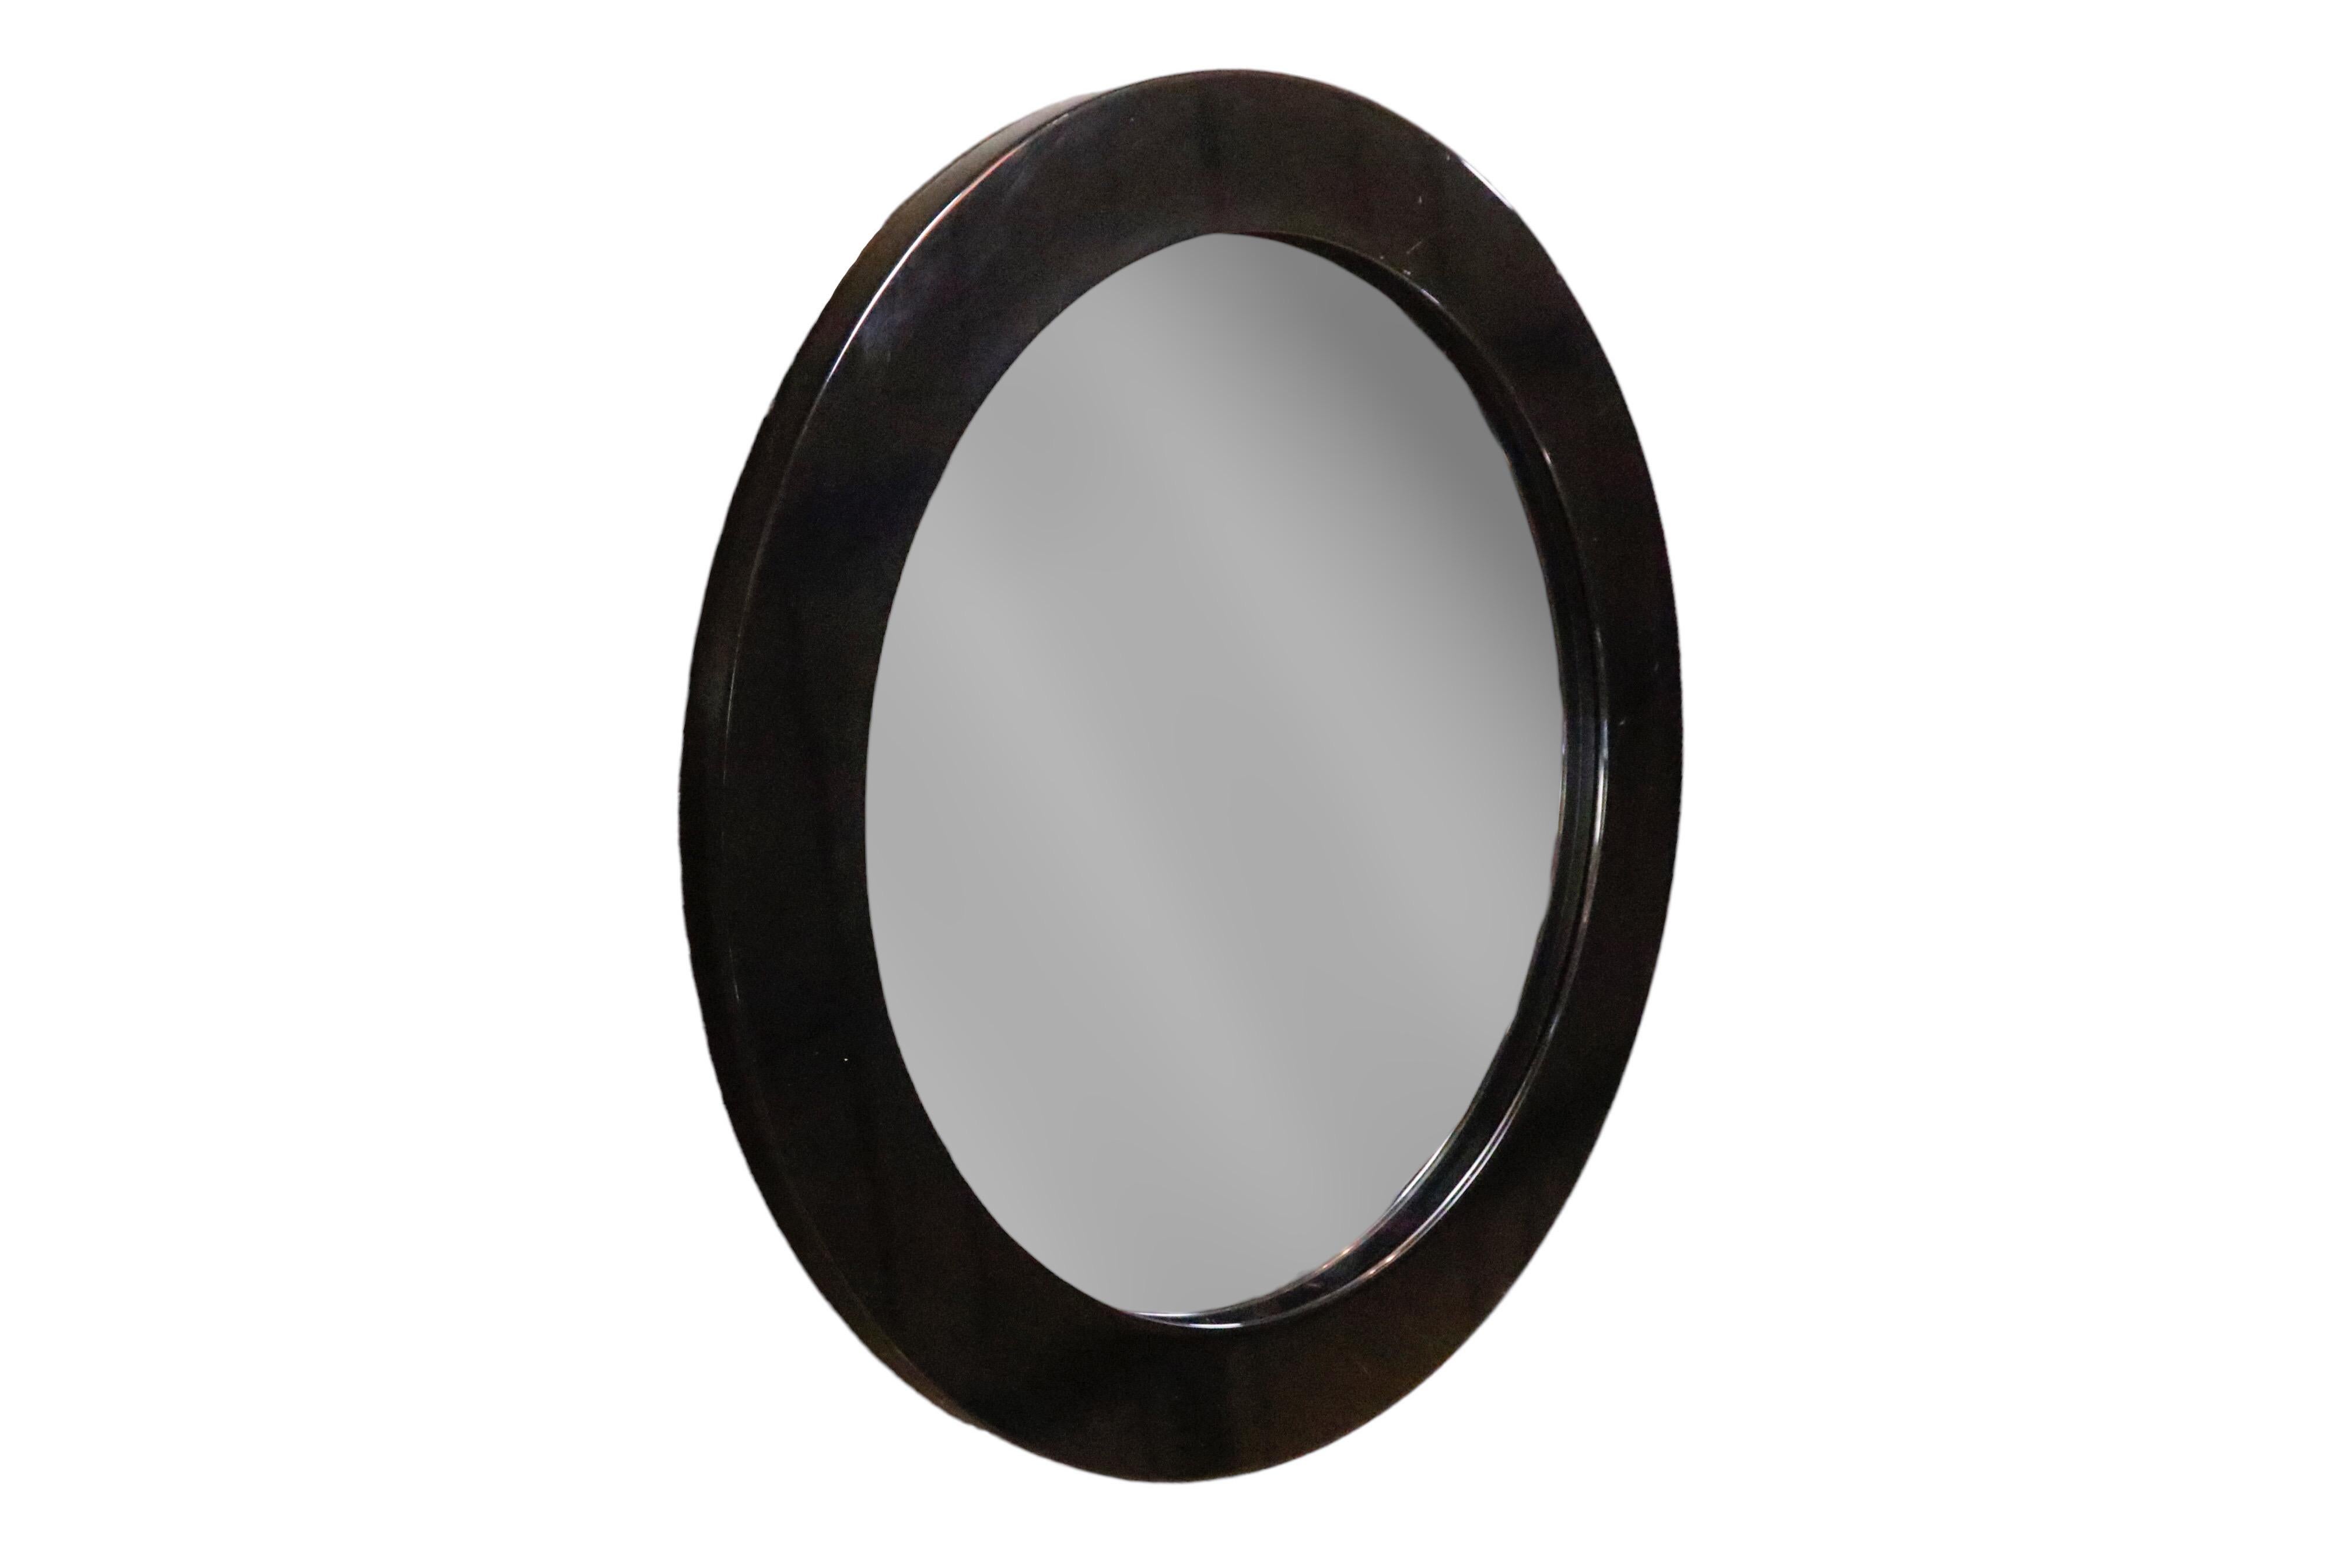 A custom made round wall mirror with a thick, deep substantial frame.  USA, circa 2000.

Frame is constructed of solid wood with a black lacquer finish.

Measures 36 inches wide with a 1.75 inch deep frame. 